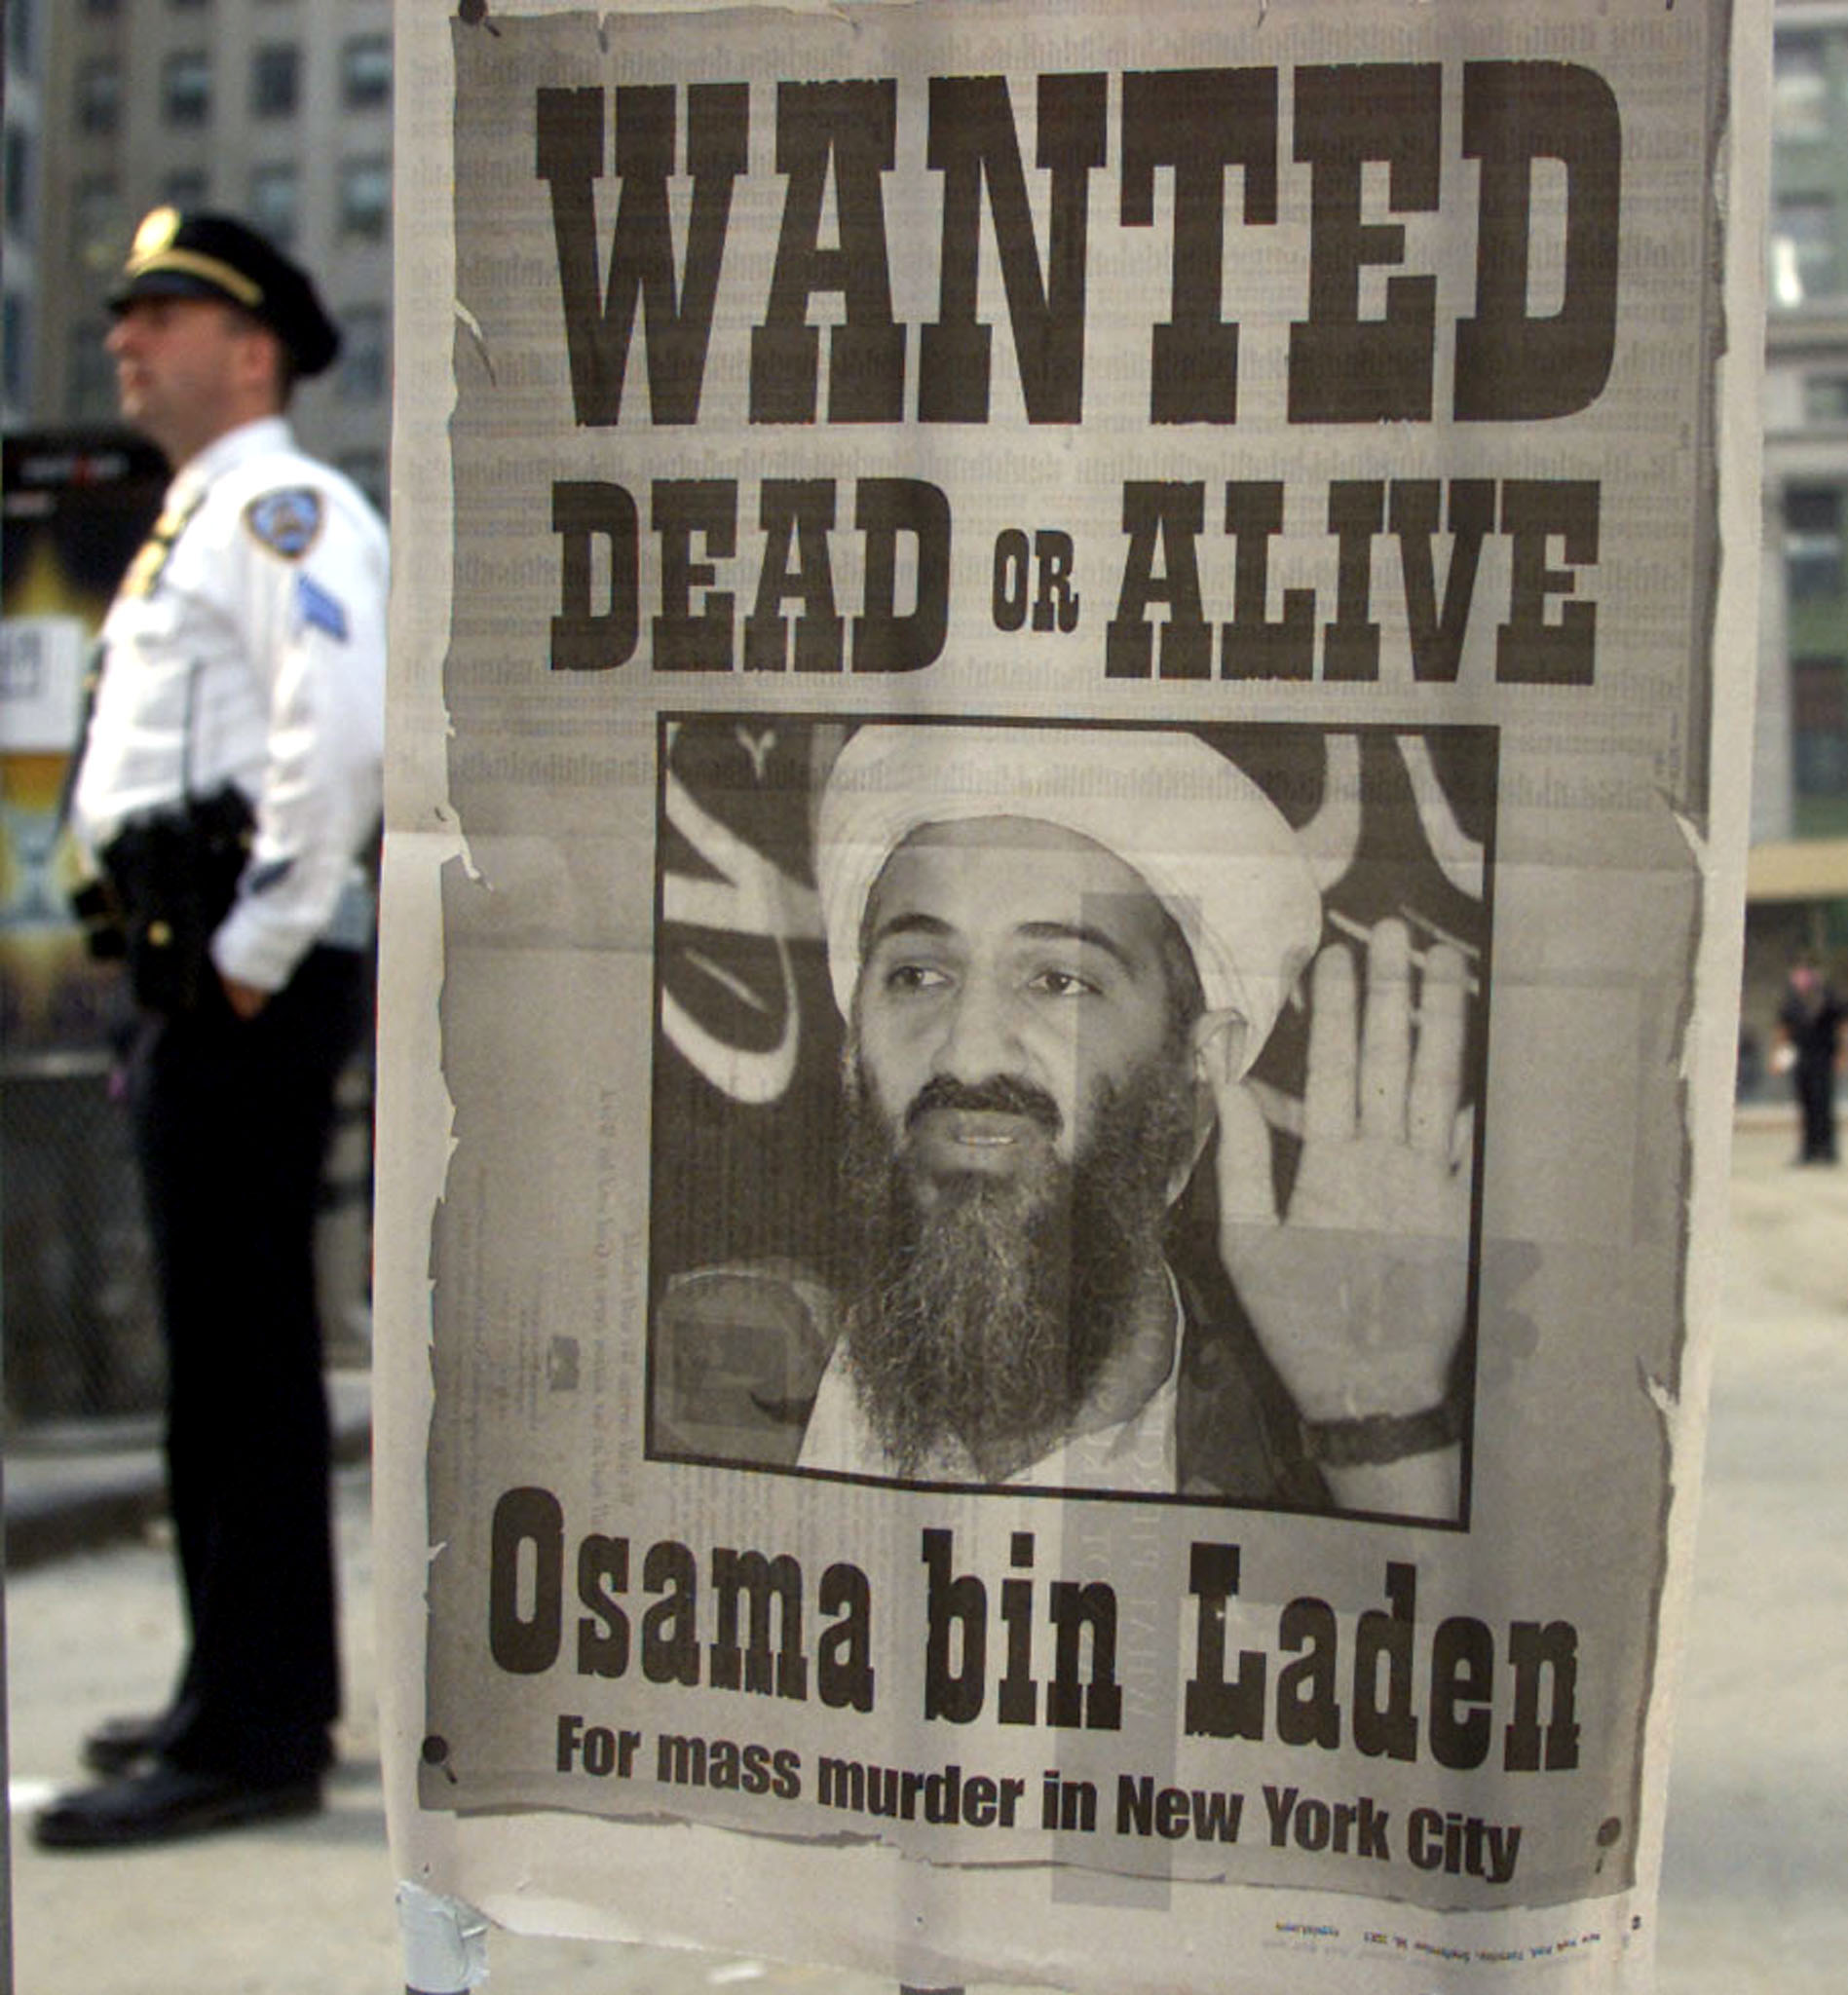 A police officer stands near a 'Wanted' poster for the Saudi-born militant Osama bin Laden in the financial district of New York, September 18, 2001. (Photo: REUTERS/Russell Boyce/Newscom)